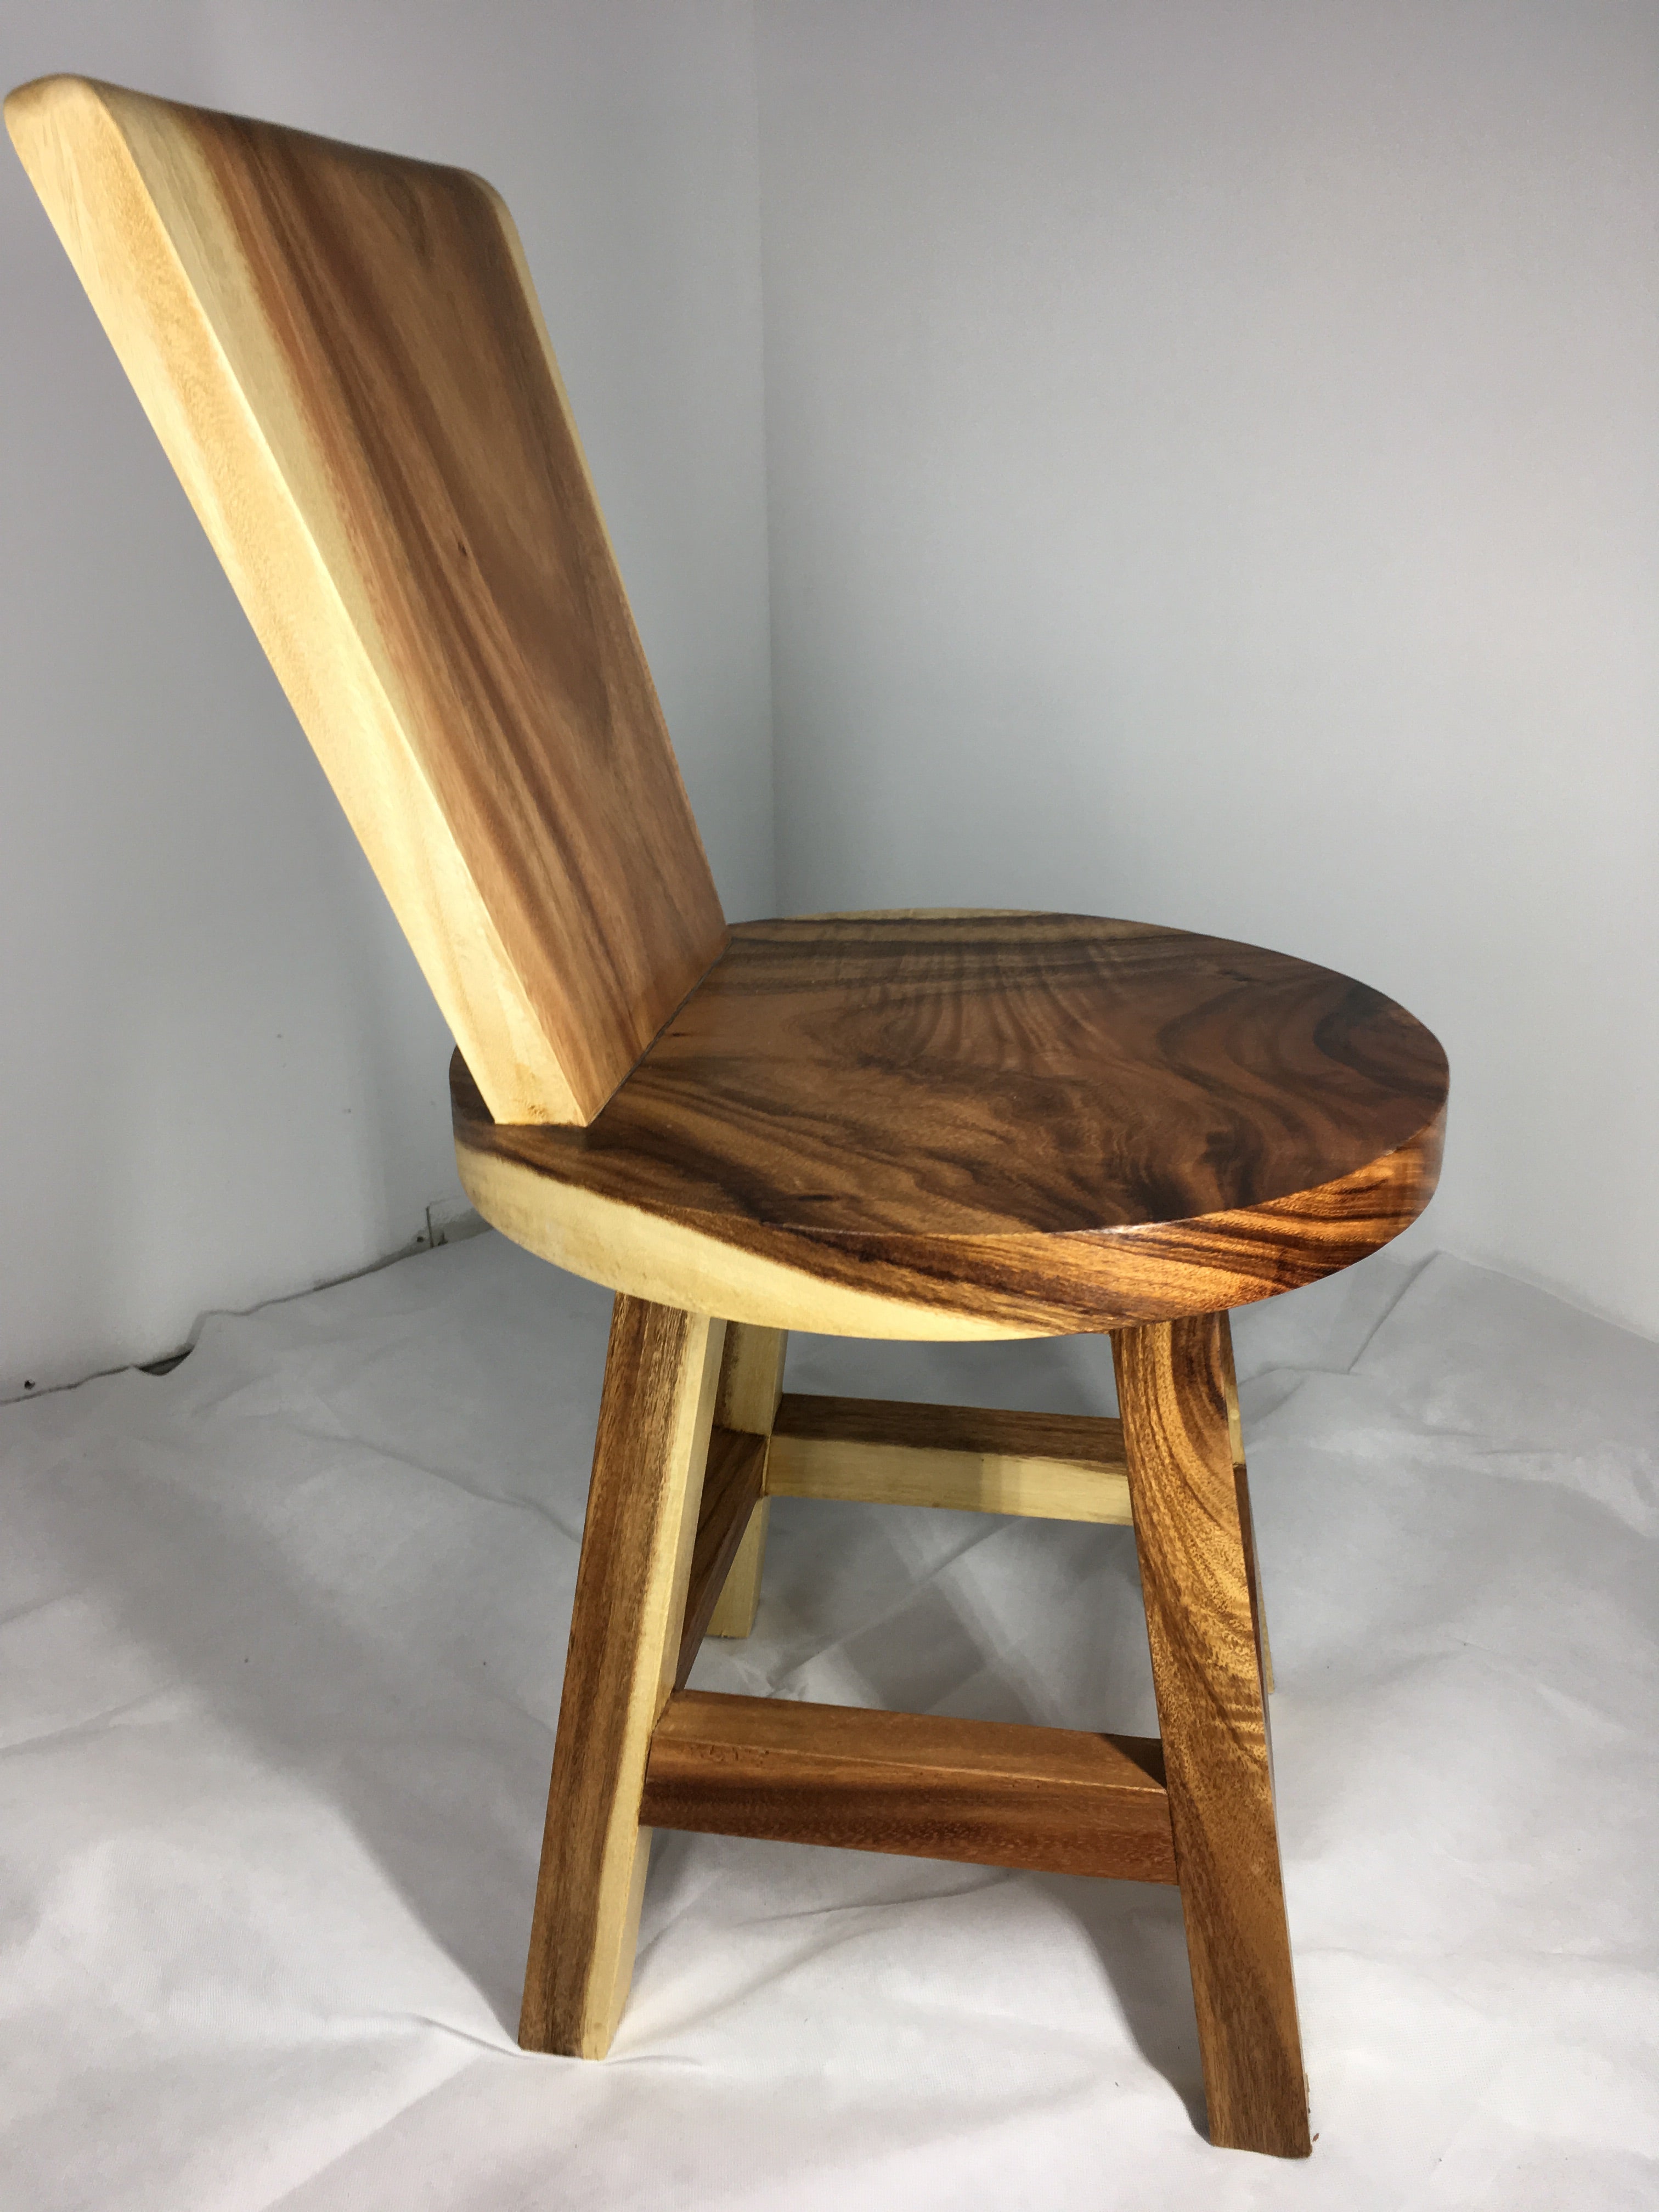 Exotic Exquisite Suar Solid Wood Dining Chair Wholesale Price